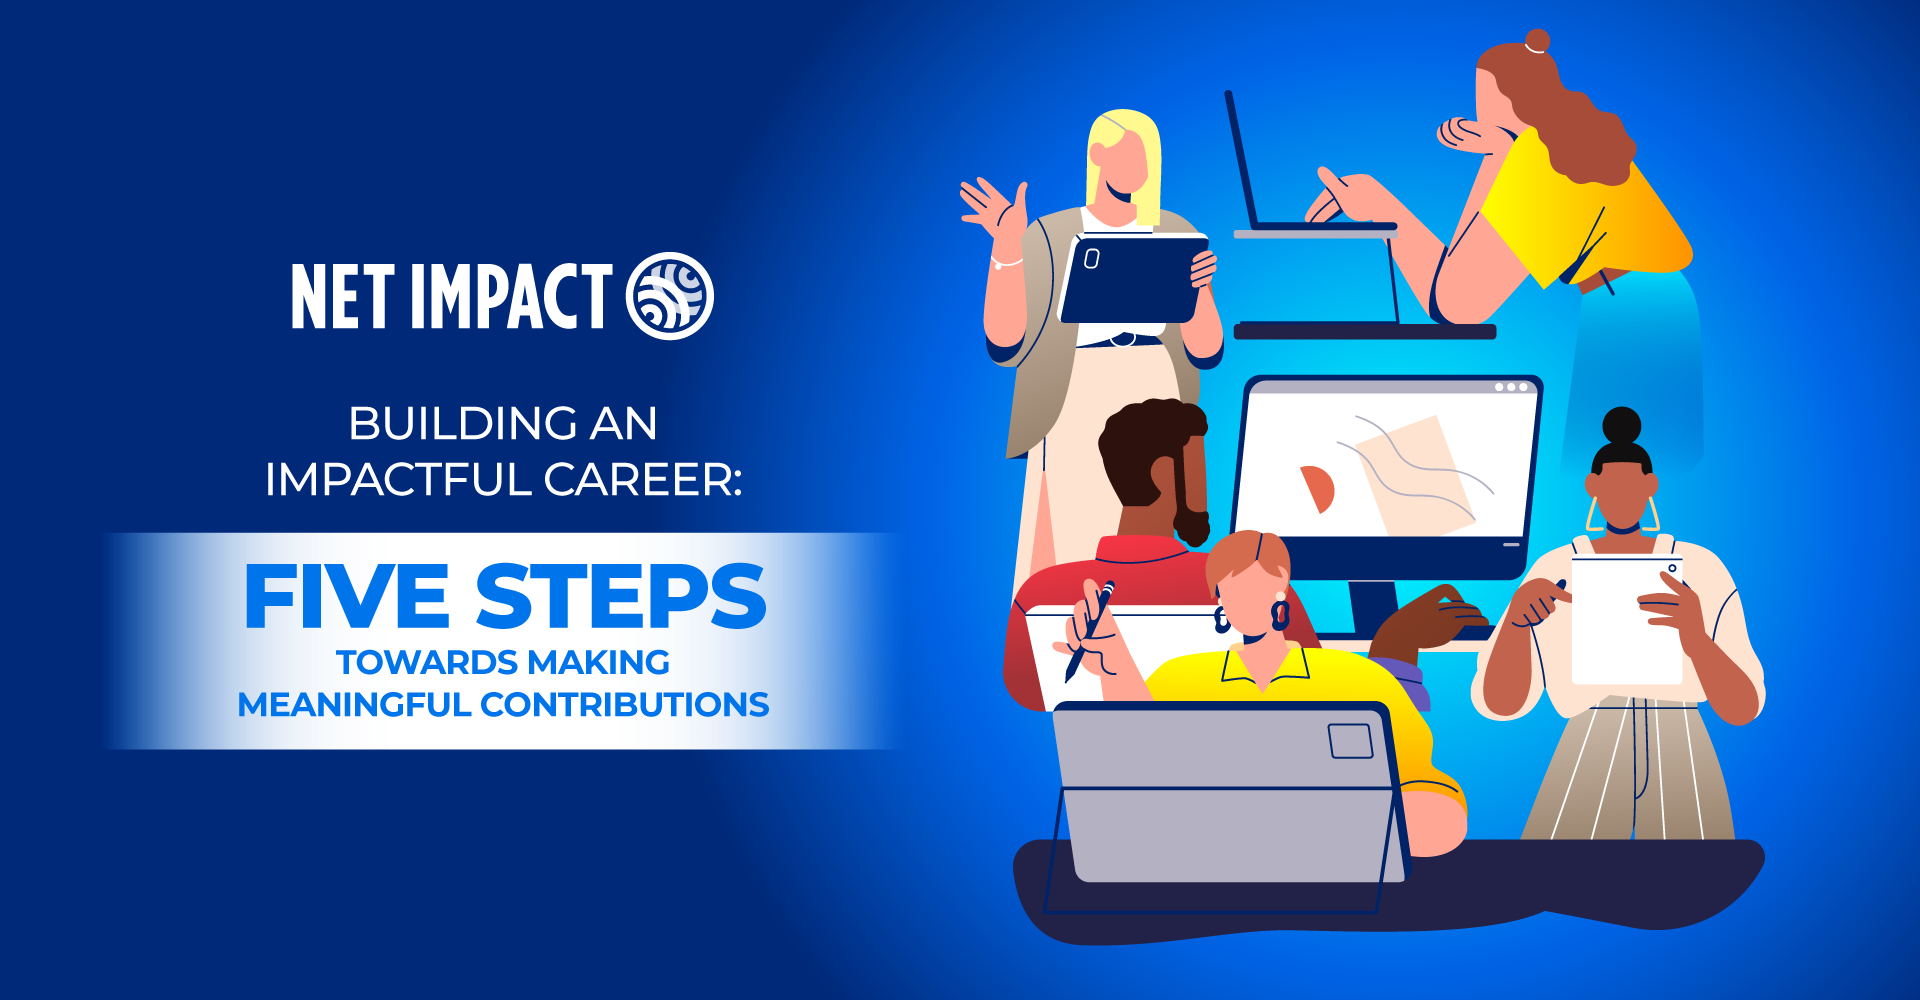 Building an Impactful Career: Five Steps Towards Meaningful Contributions